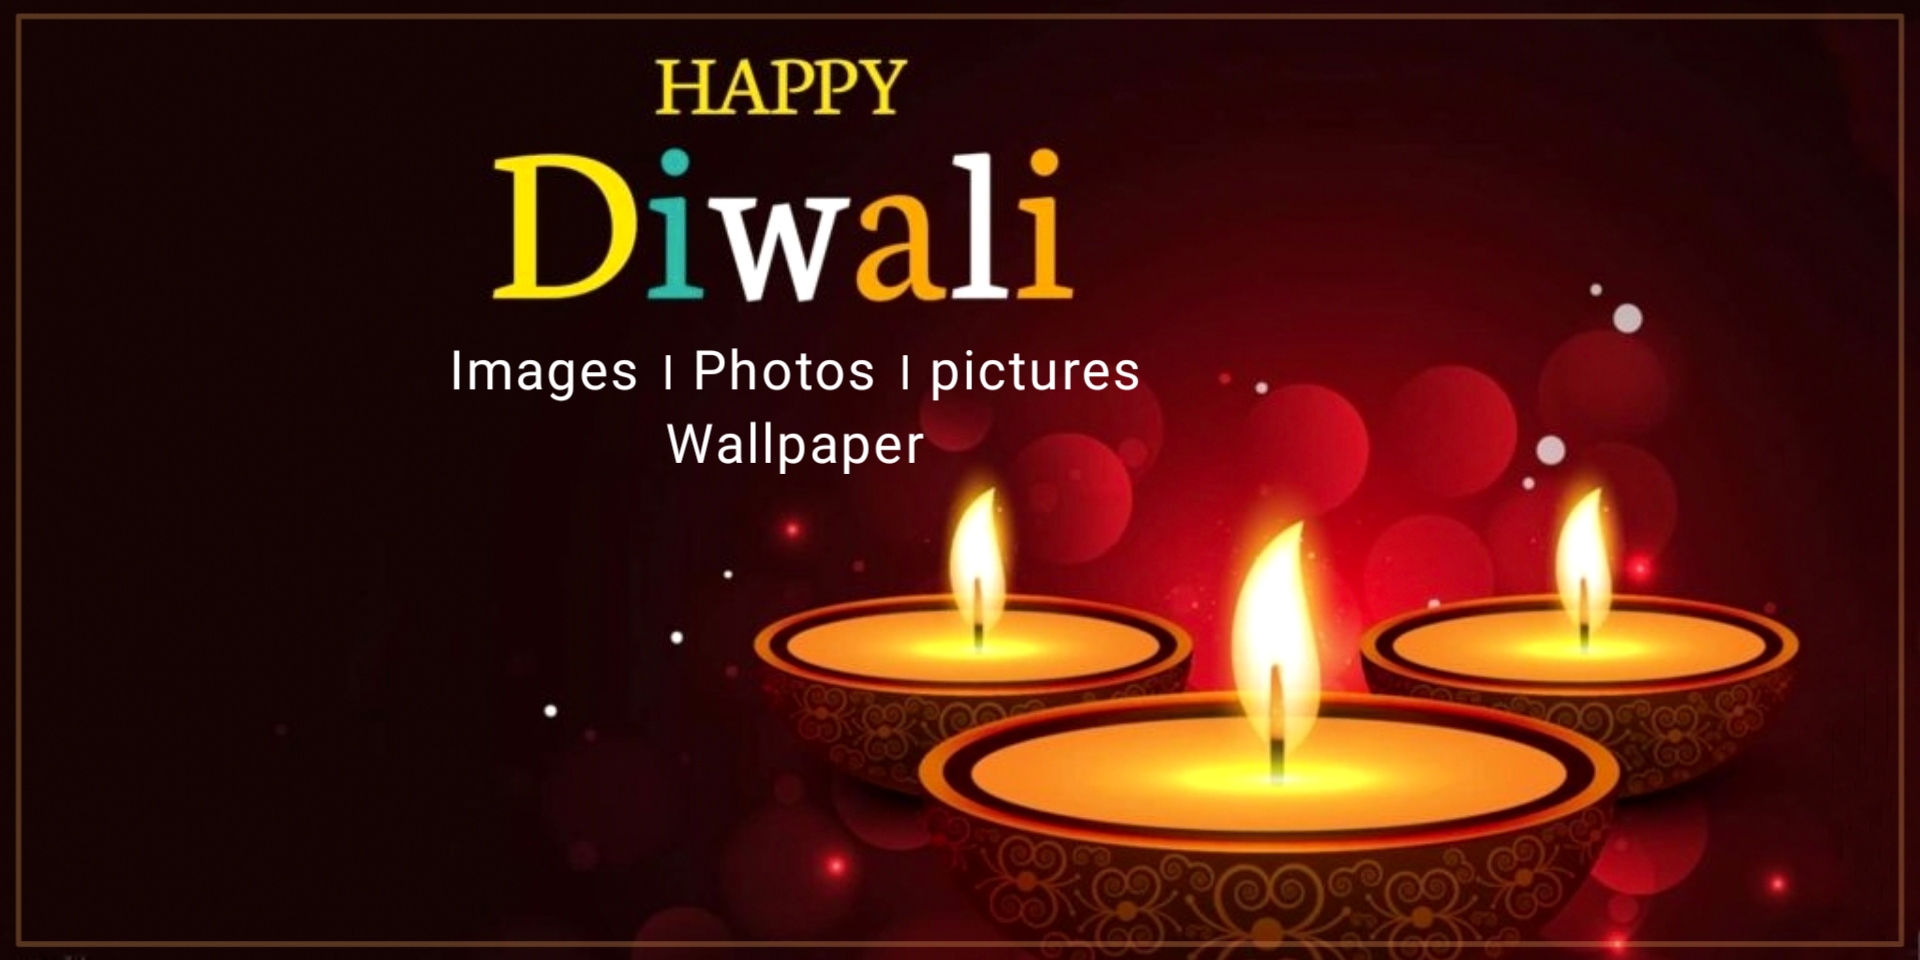 Happy Diwali Images, Photos, Pictures & Wallpapers 2022 ...